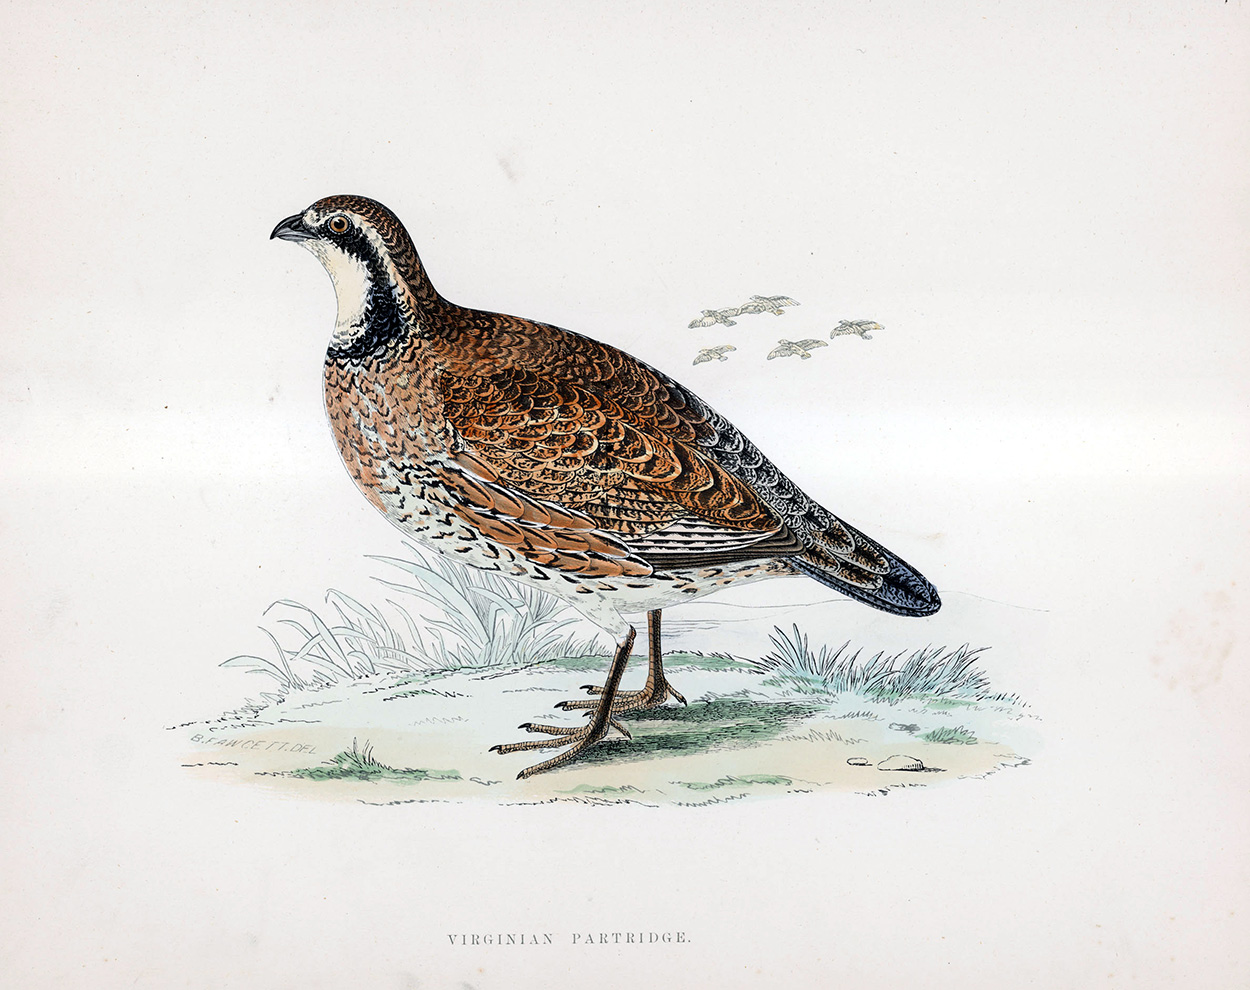 Virginian Partridge - hand coloured lithograph 1891 (Print) art by Beverley R Morris at The Illustration Art Gallery